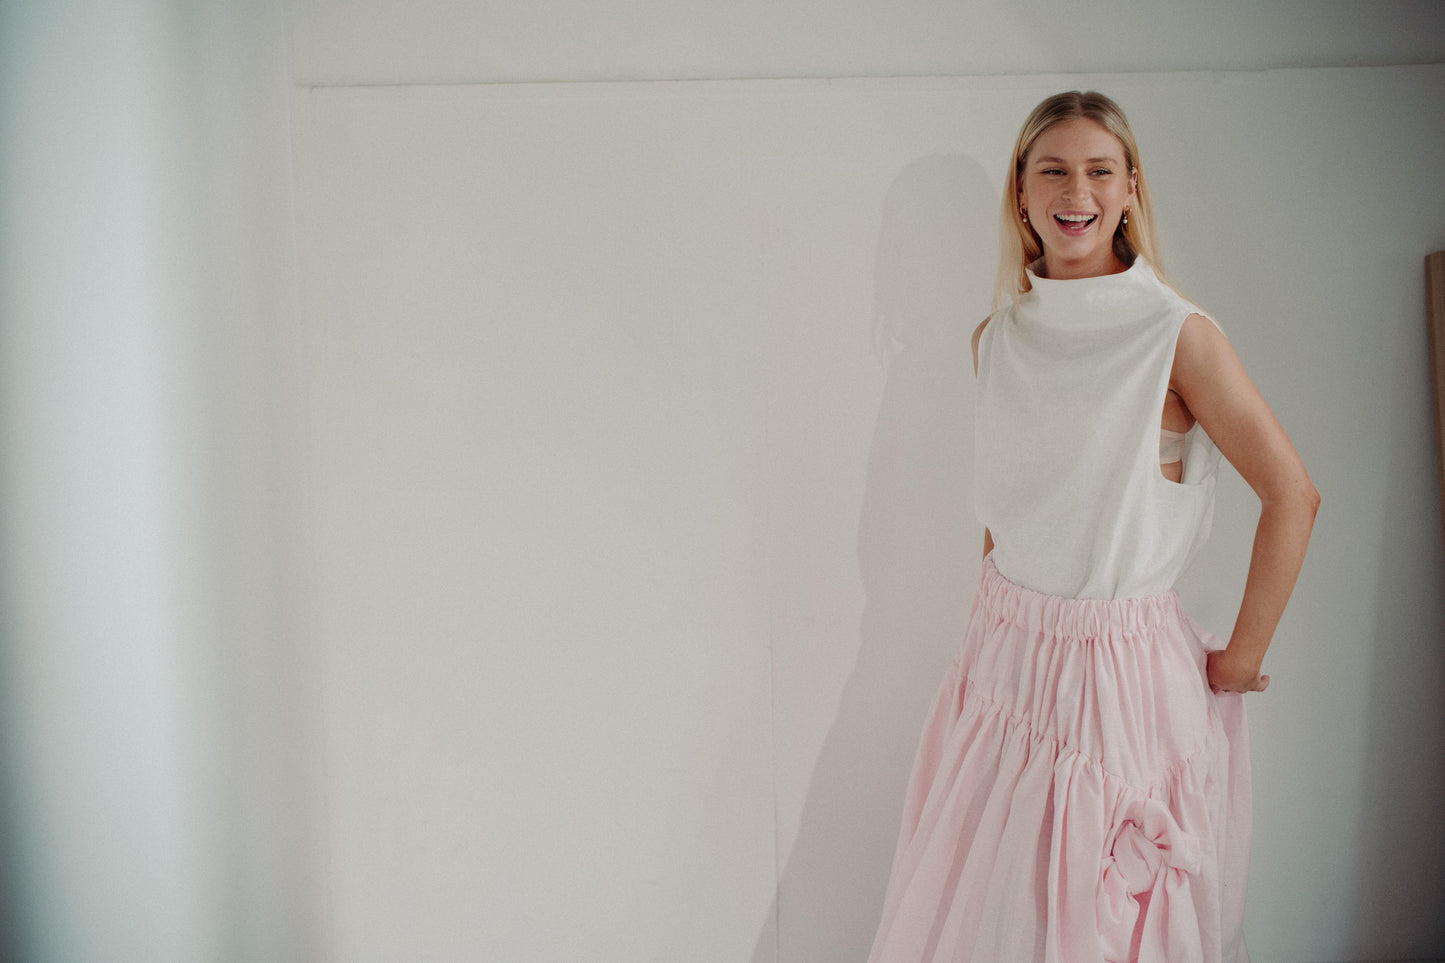 PINK TUTU | The linen tutu, now in the most whimsical, pretty pink - because no one ever really grows up enough to not want to wear a tutu! Voluminous, romantic and feminine, the tutu features two gathered layers with an oversized bow in a luxurious dark